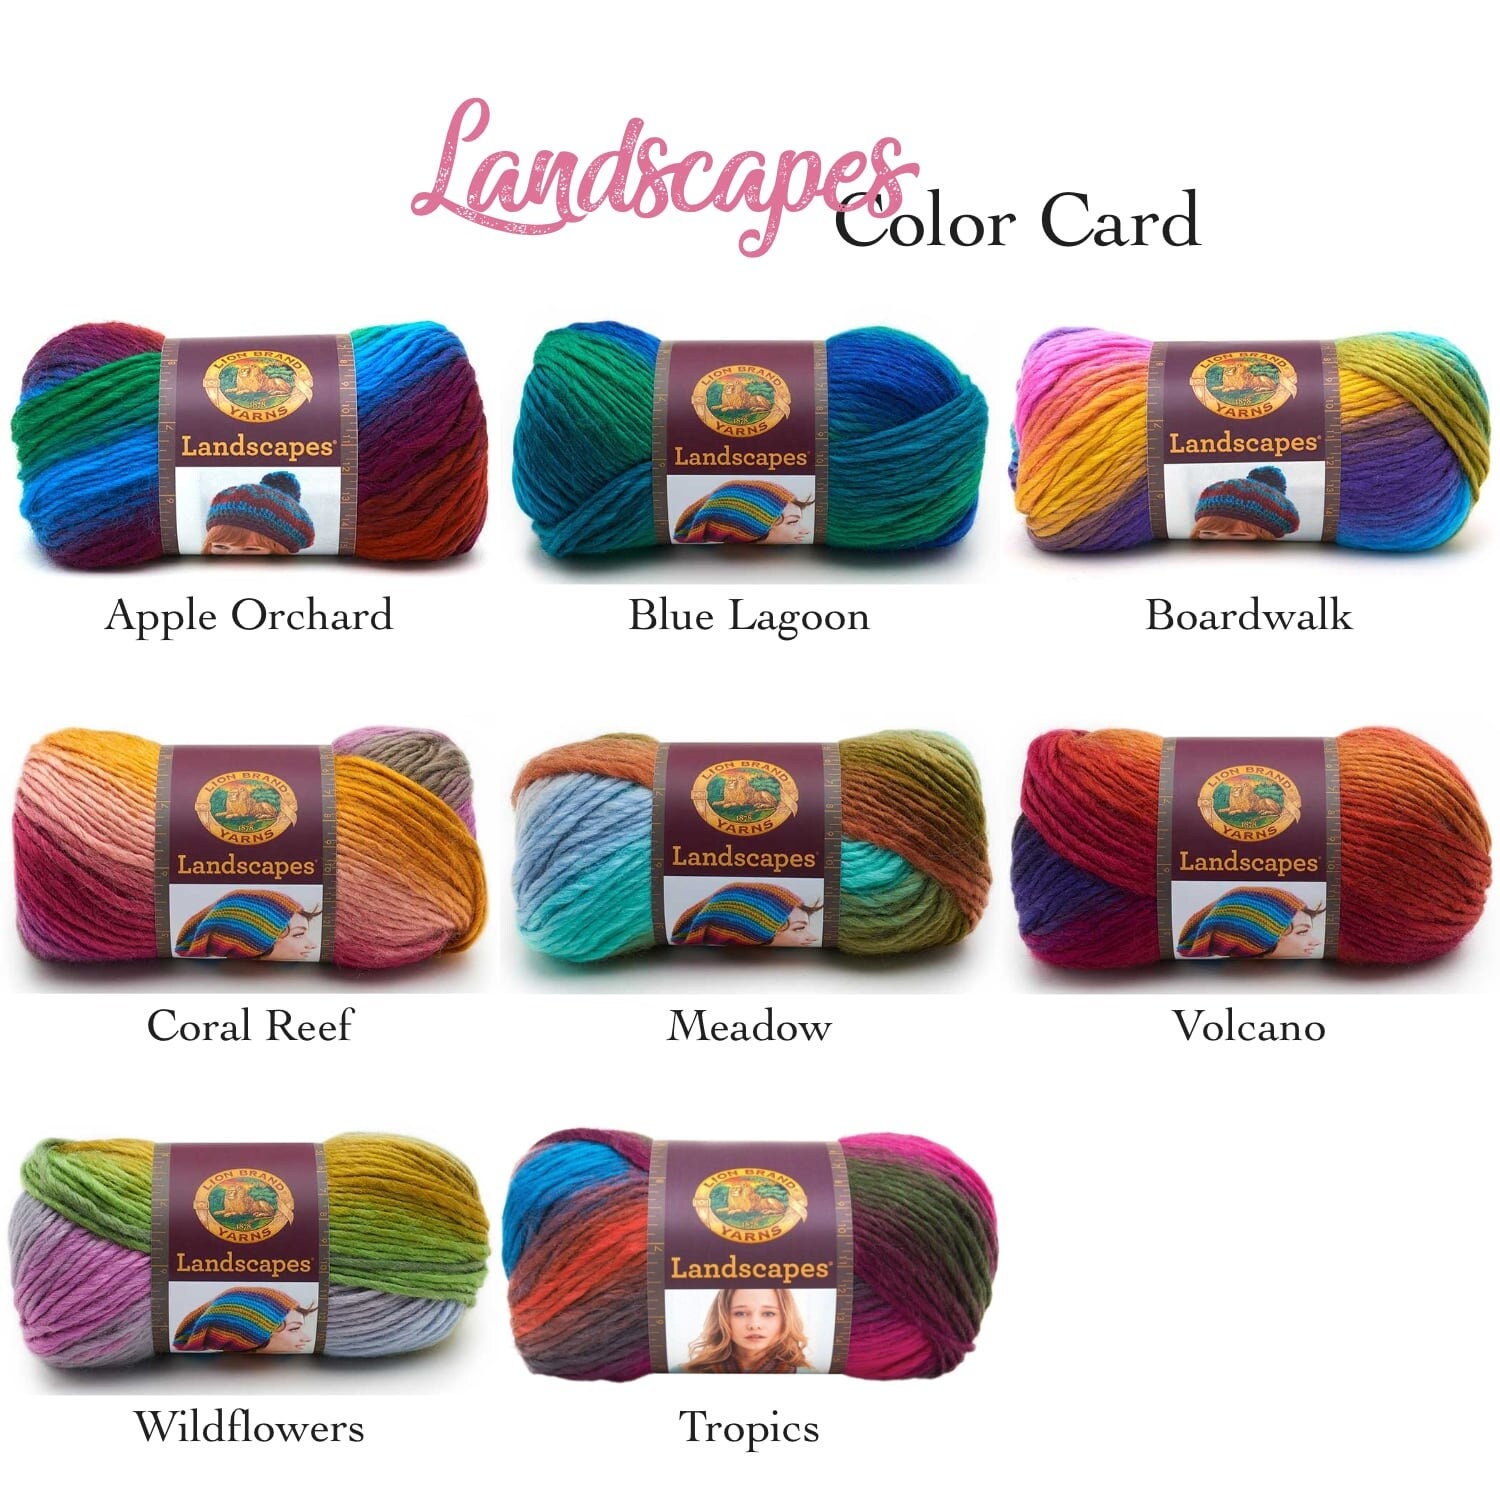 LB Collection® Pure Wool Yarn - Discontinued – Lion Brand Yarn